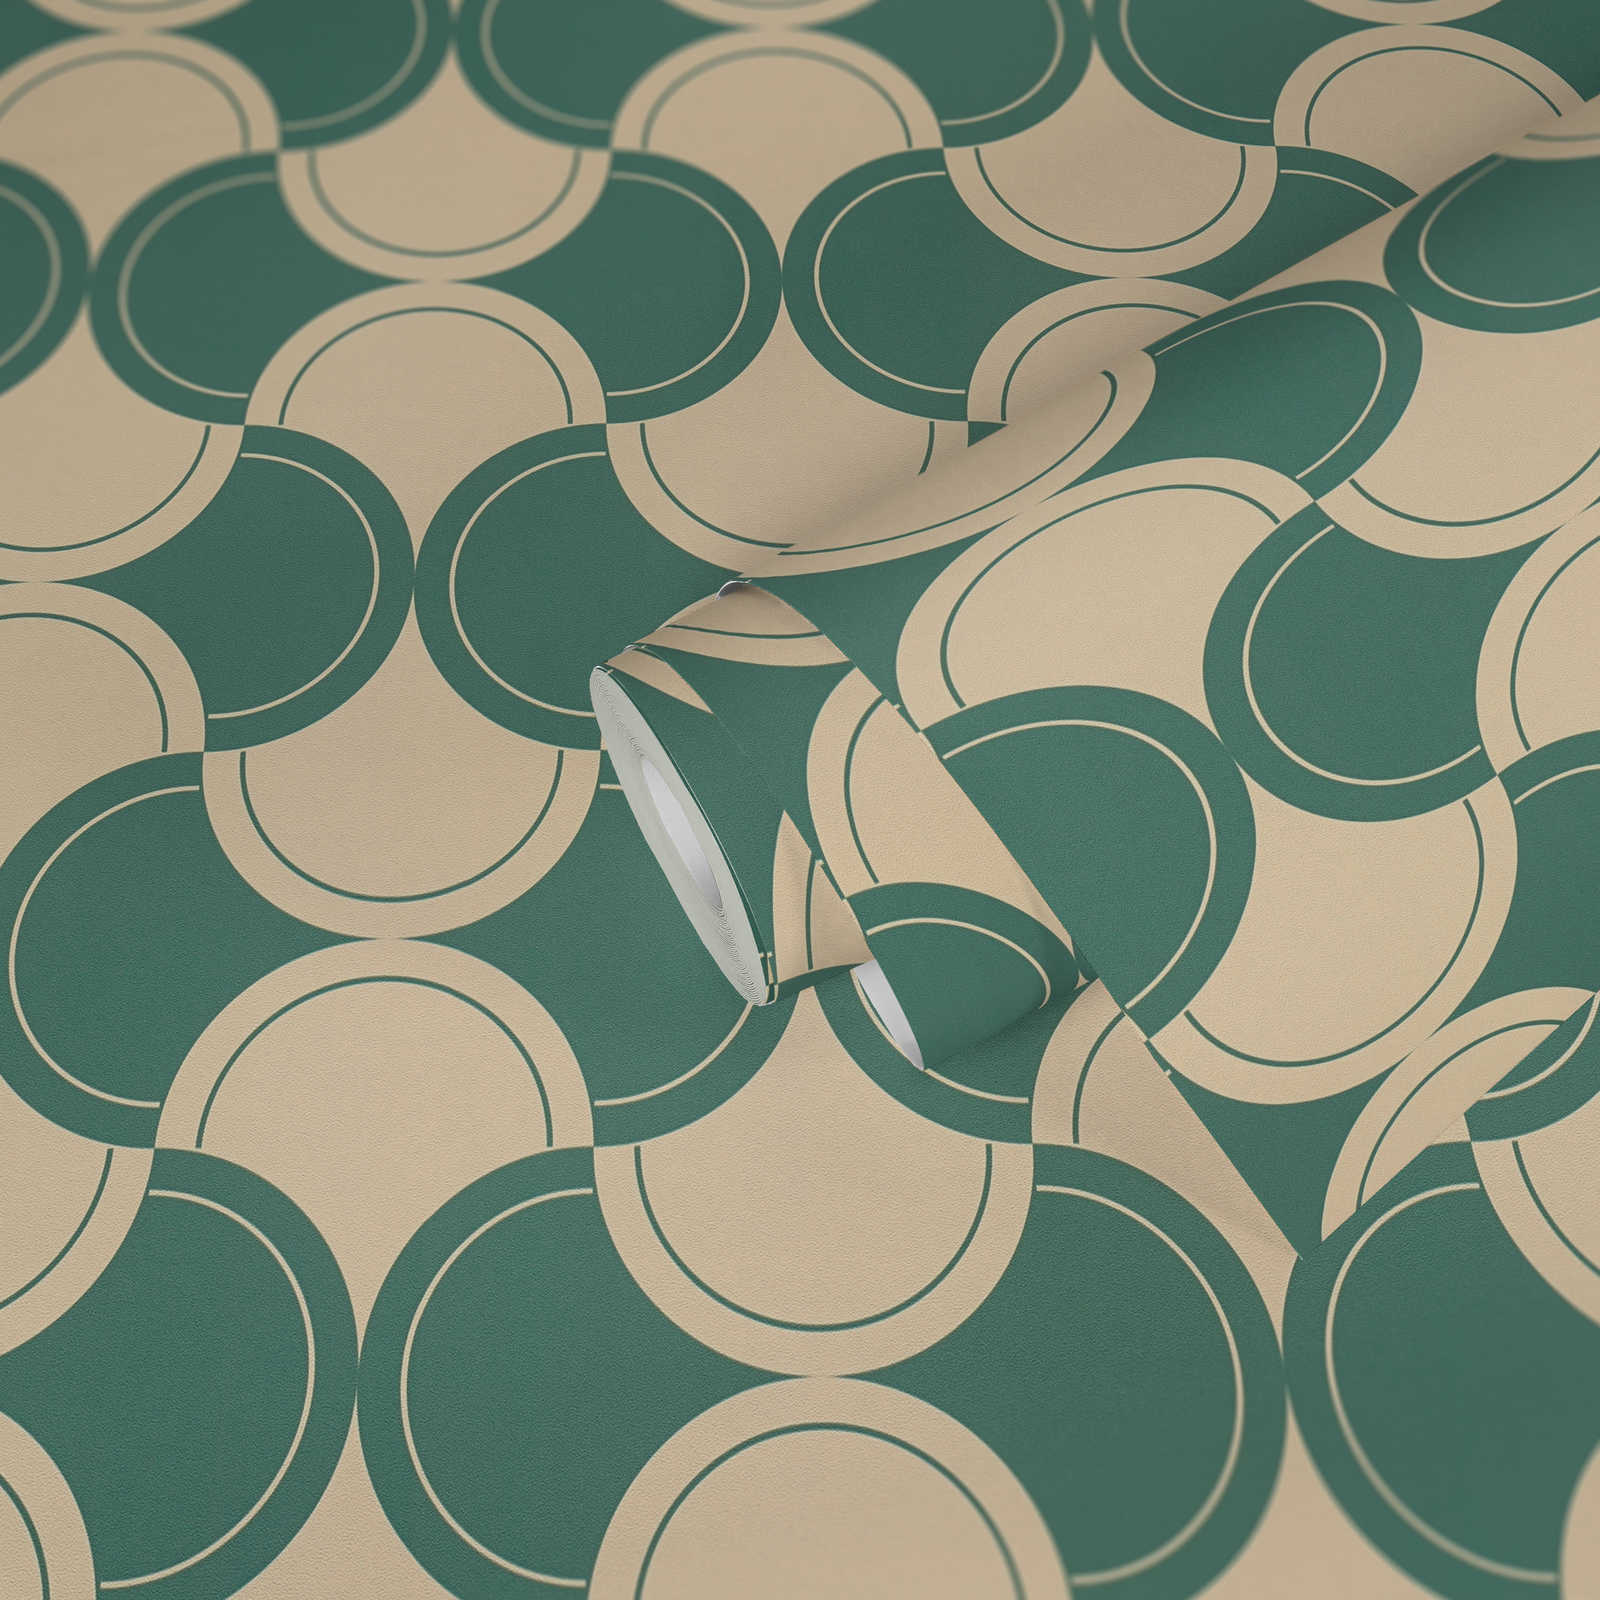             Non-woven wallpaper with semi-circle pattern in 70s style - green, beige
        